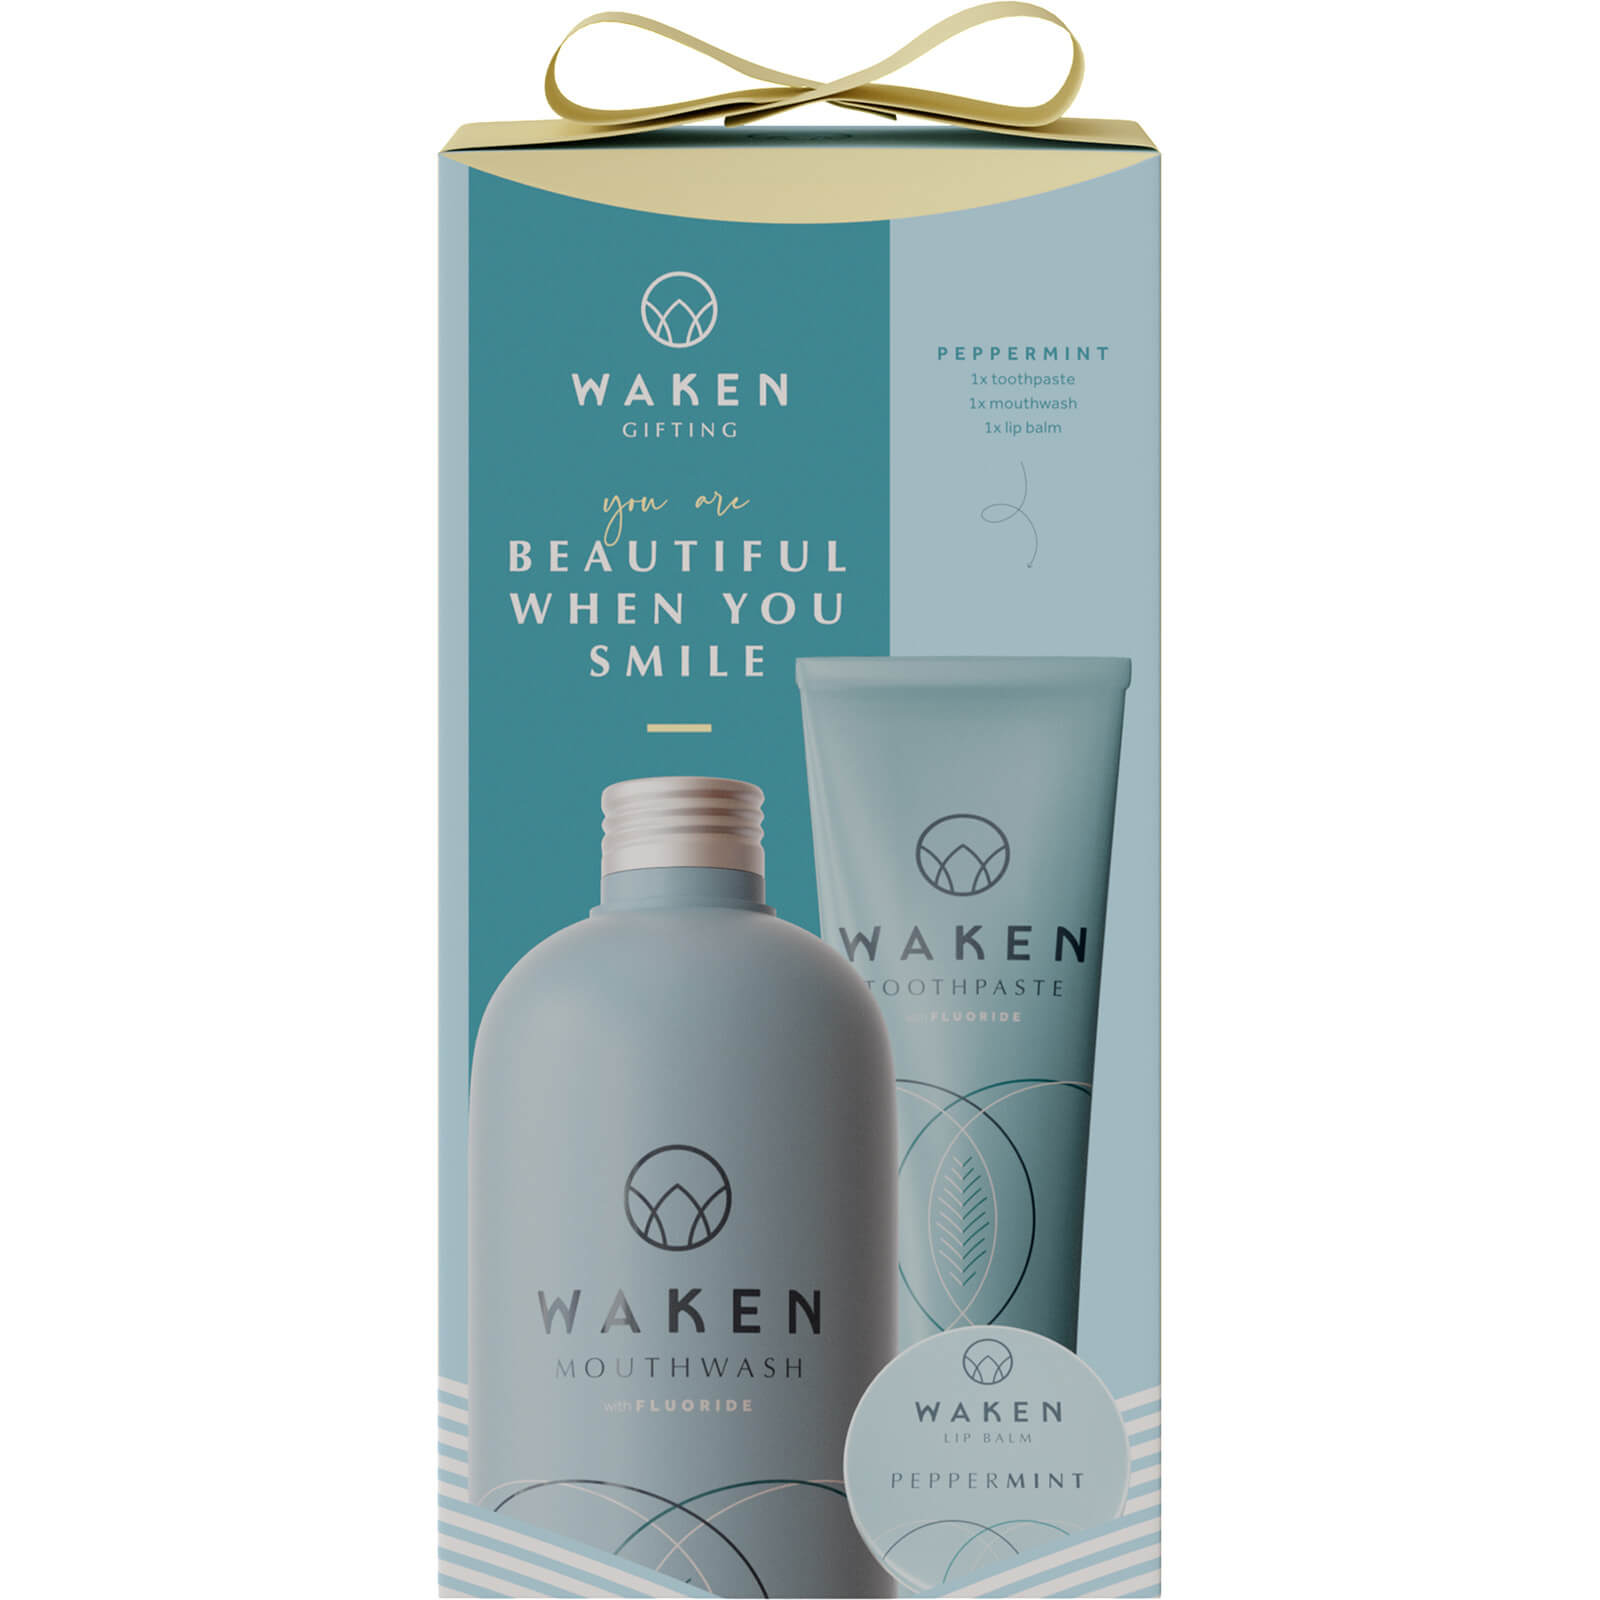 Waken Gift 2 Beautiful When You Smile Peppermint 850g